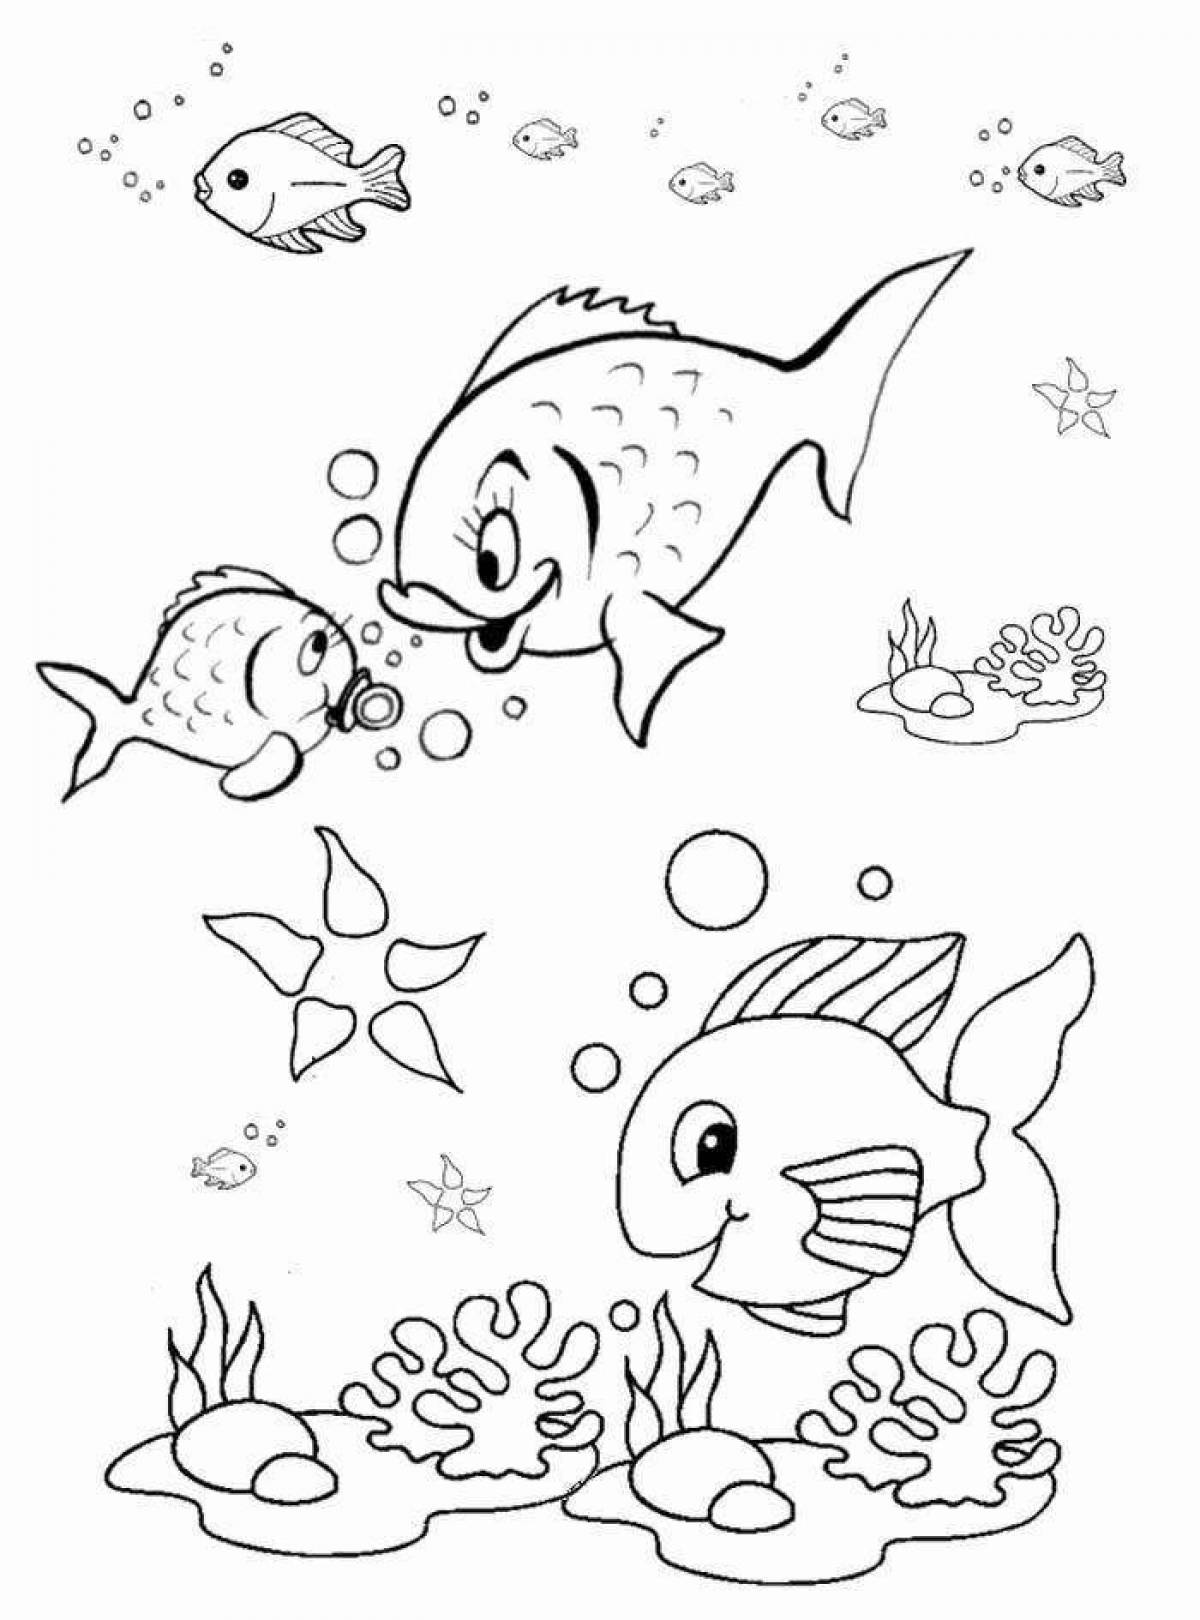 Sweet fish coloring book for children 5-6 years old